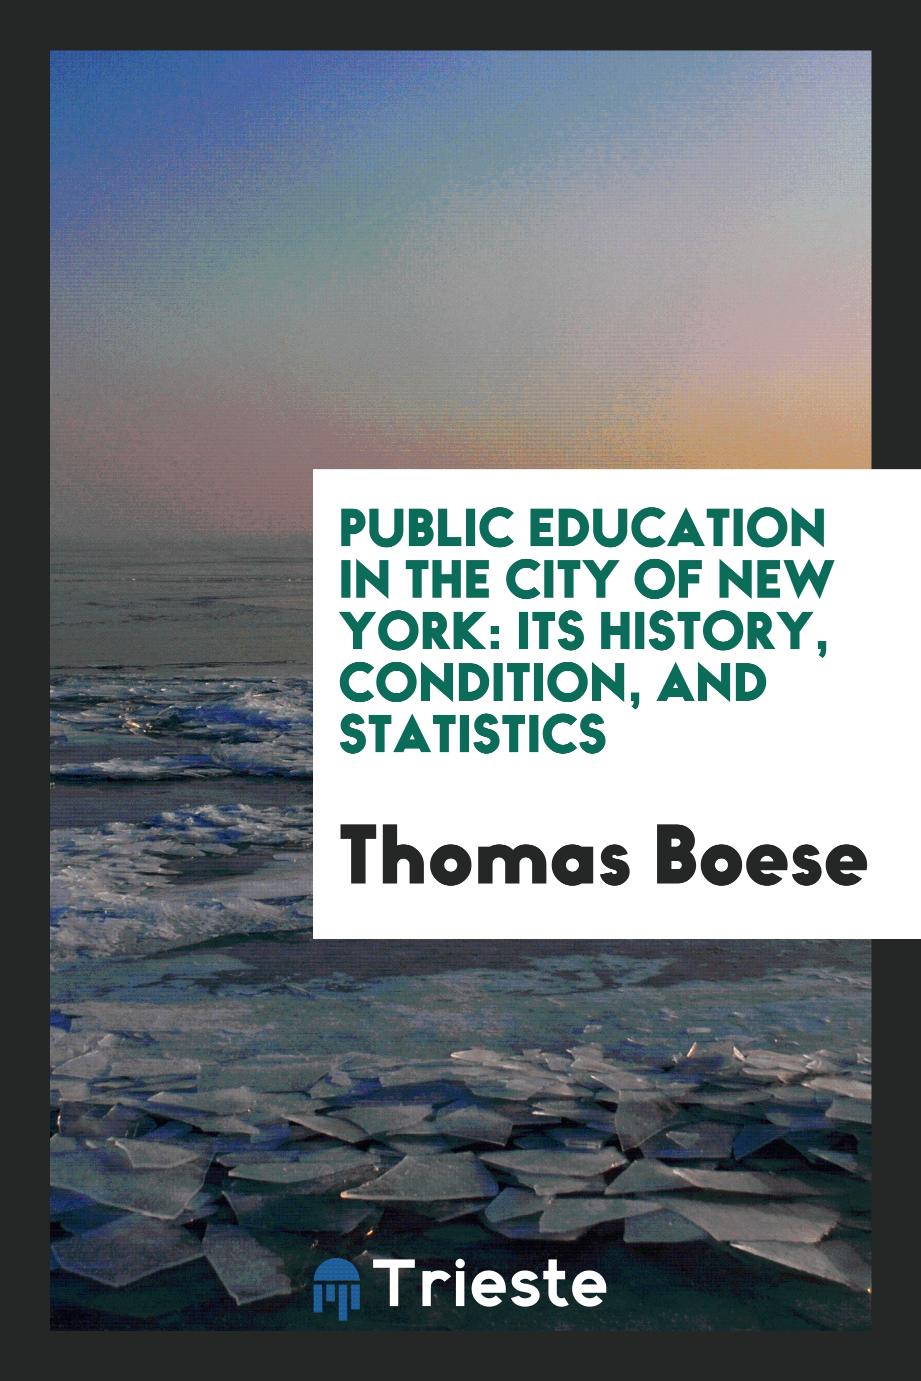 Public education in the city of New York: its history, condition, and statistics